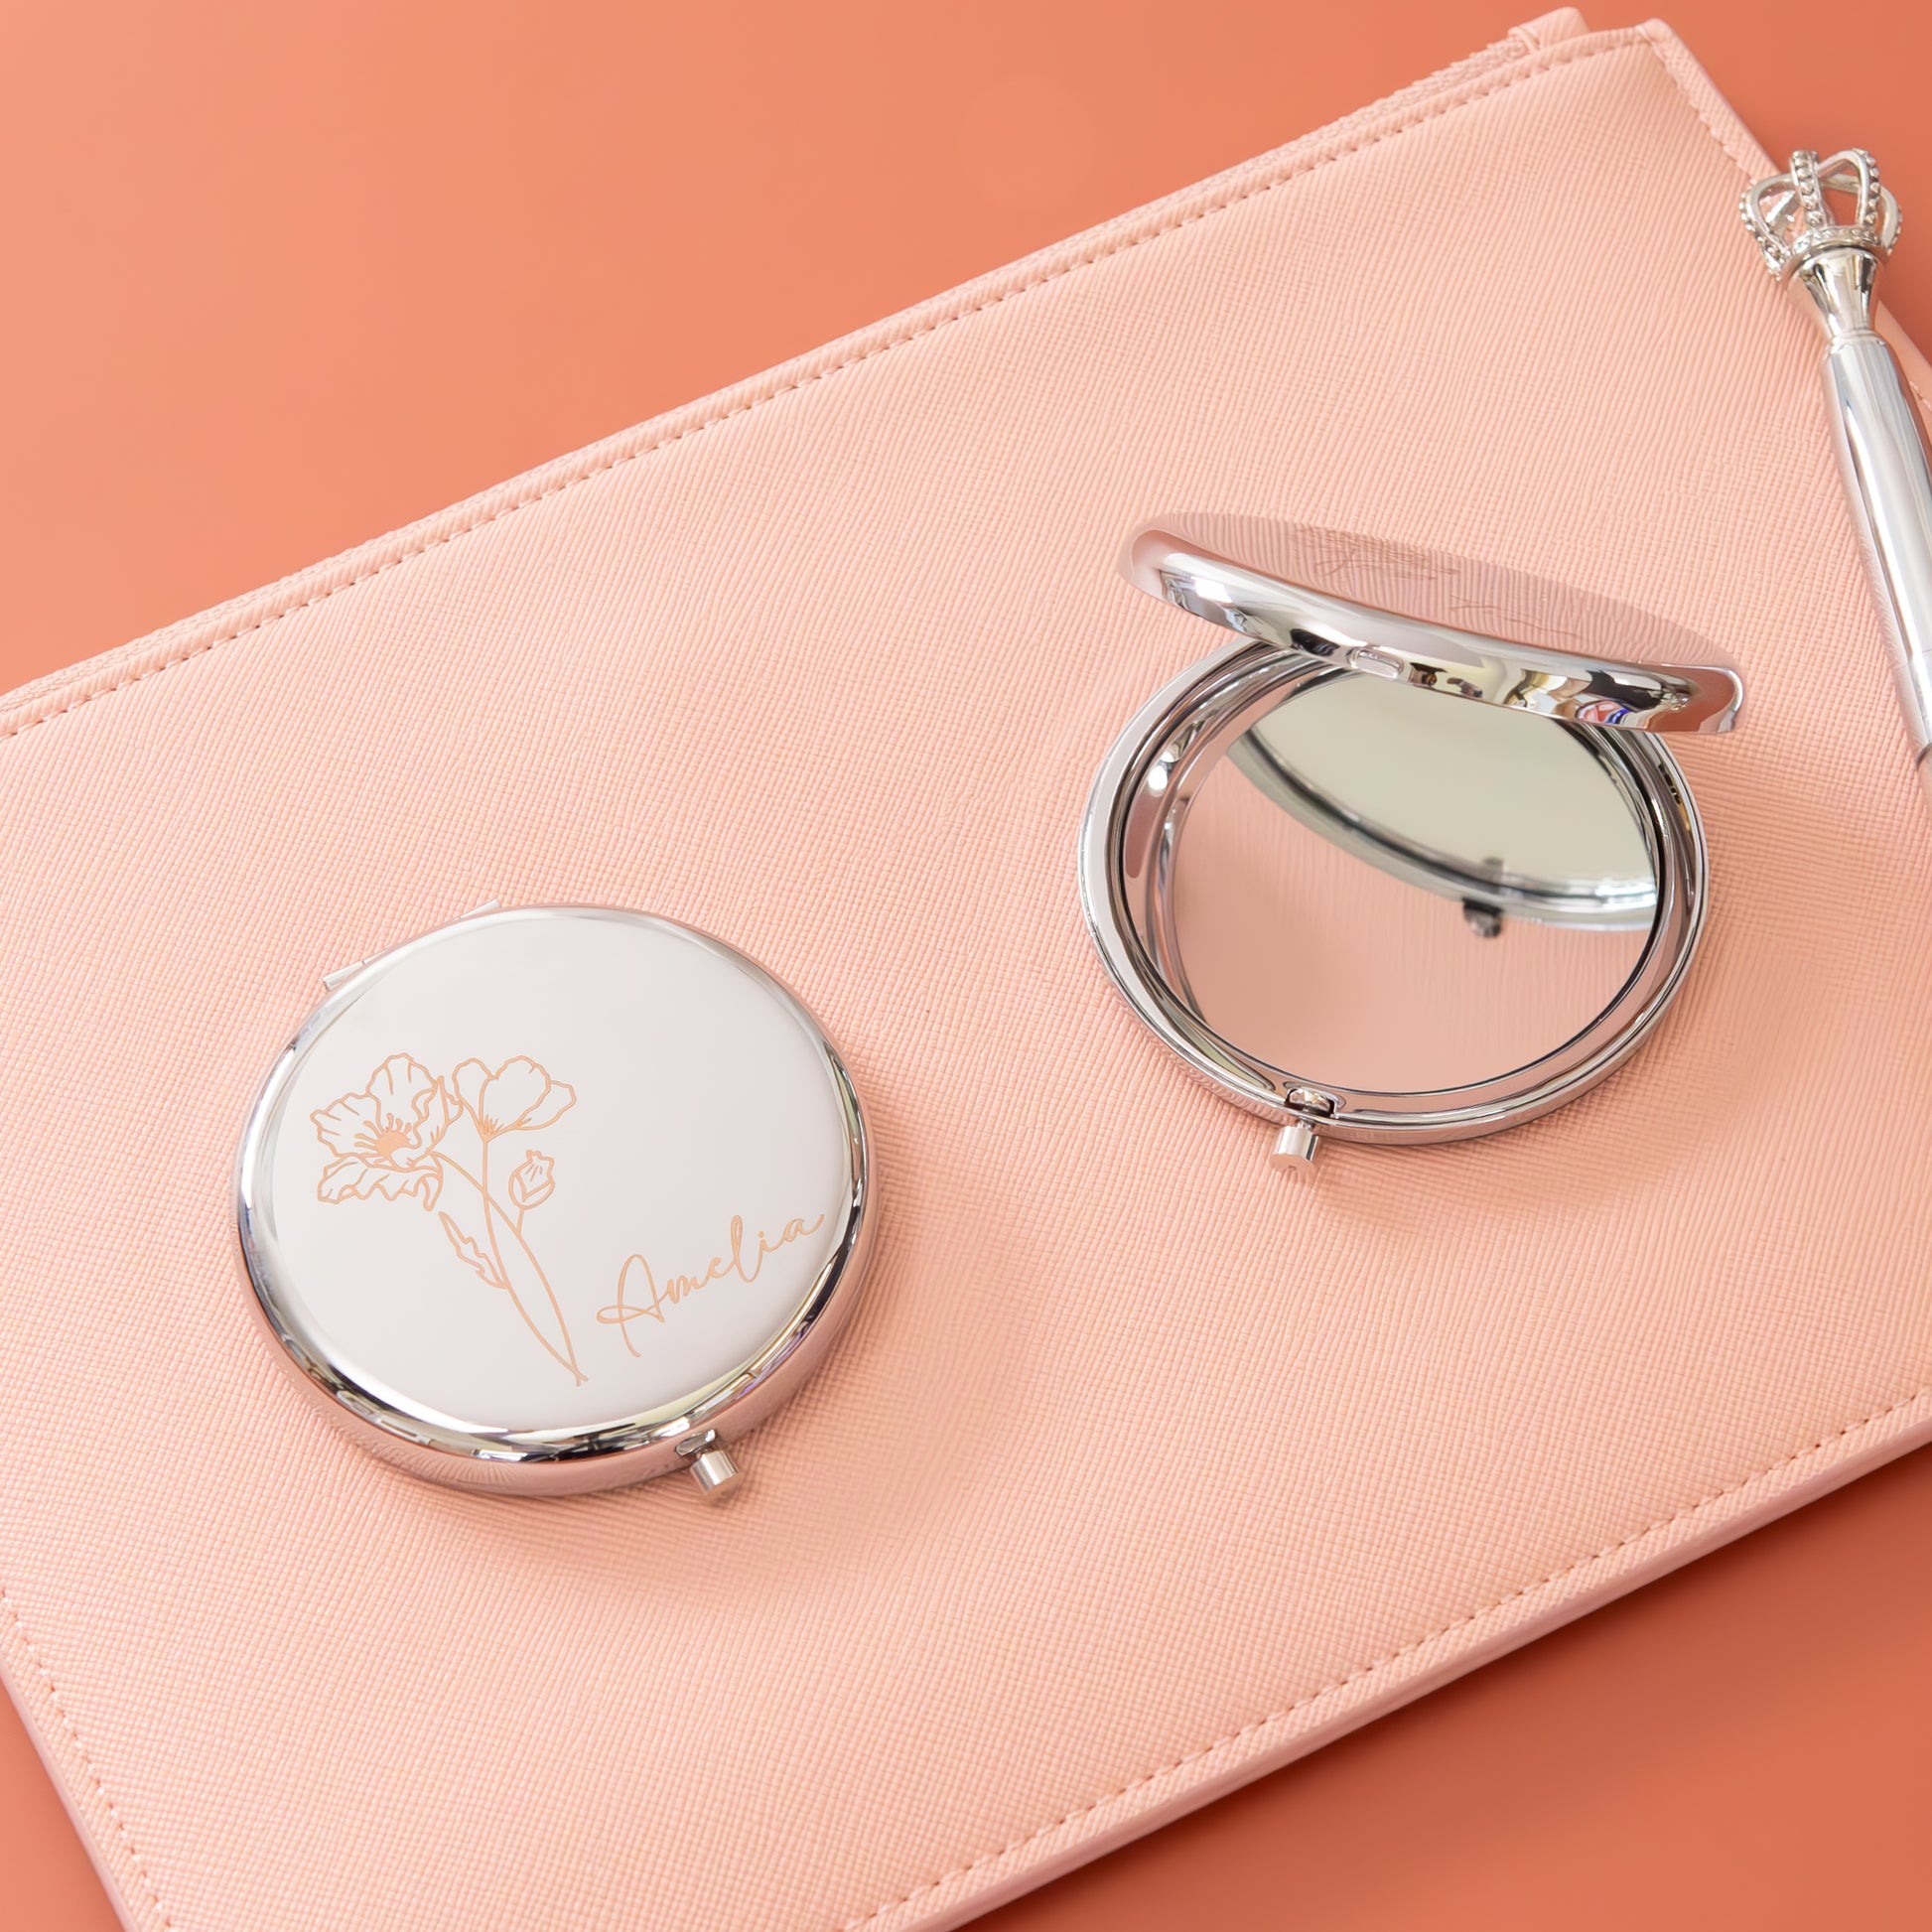 Silver personalised compact mirror with clutch pouch